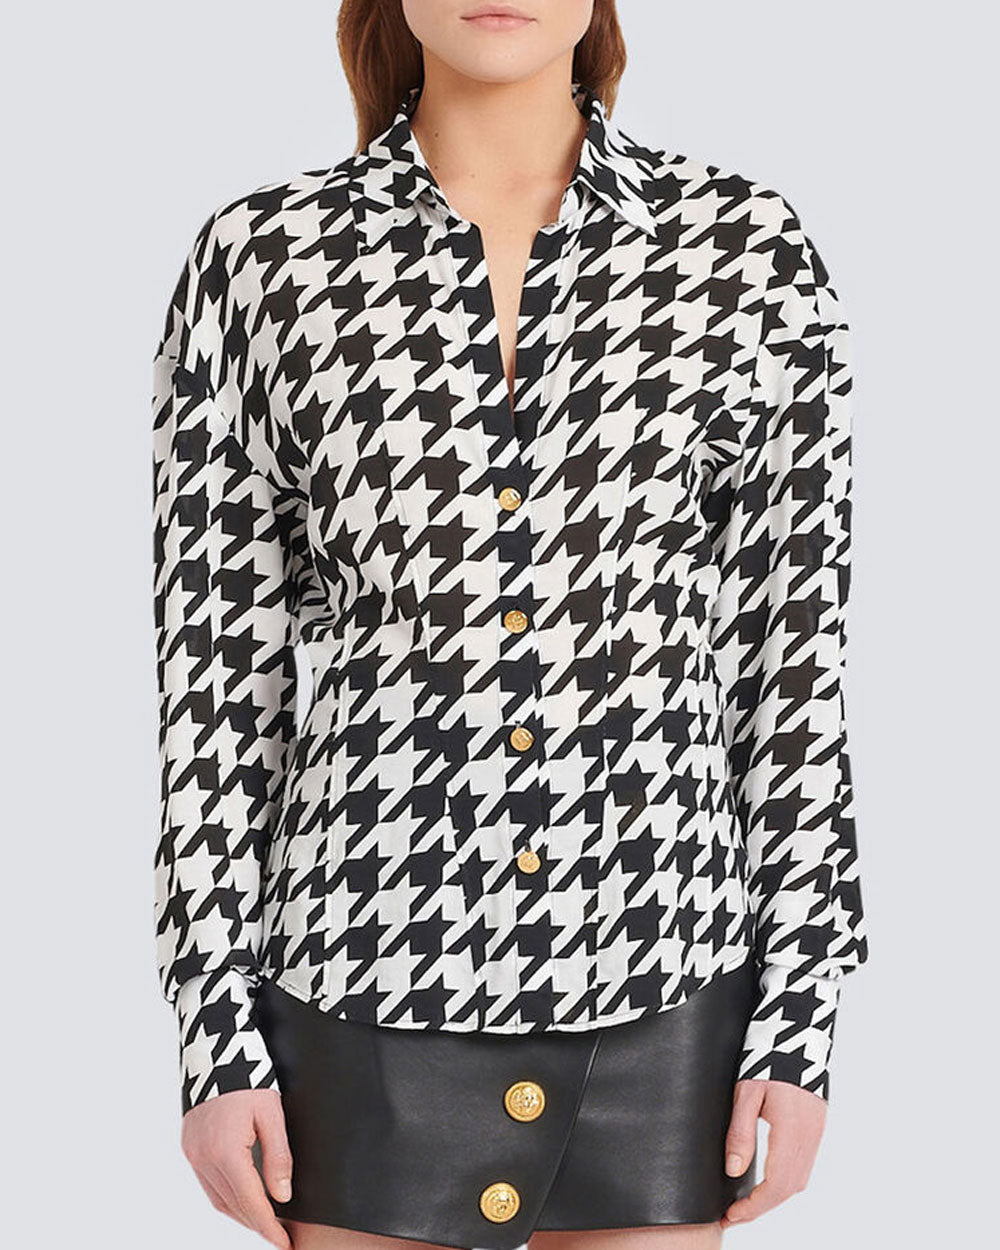 Noir and Blanc Houndstooth Shirt